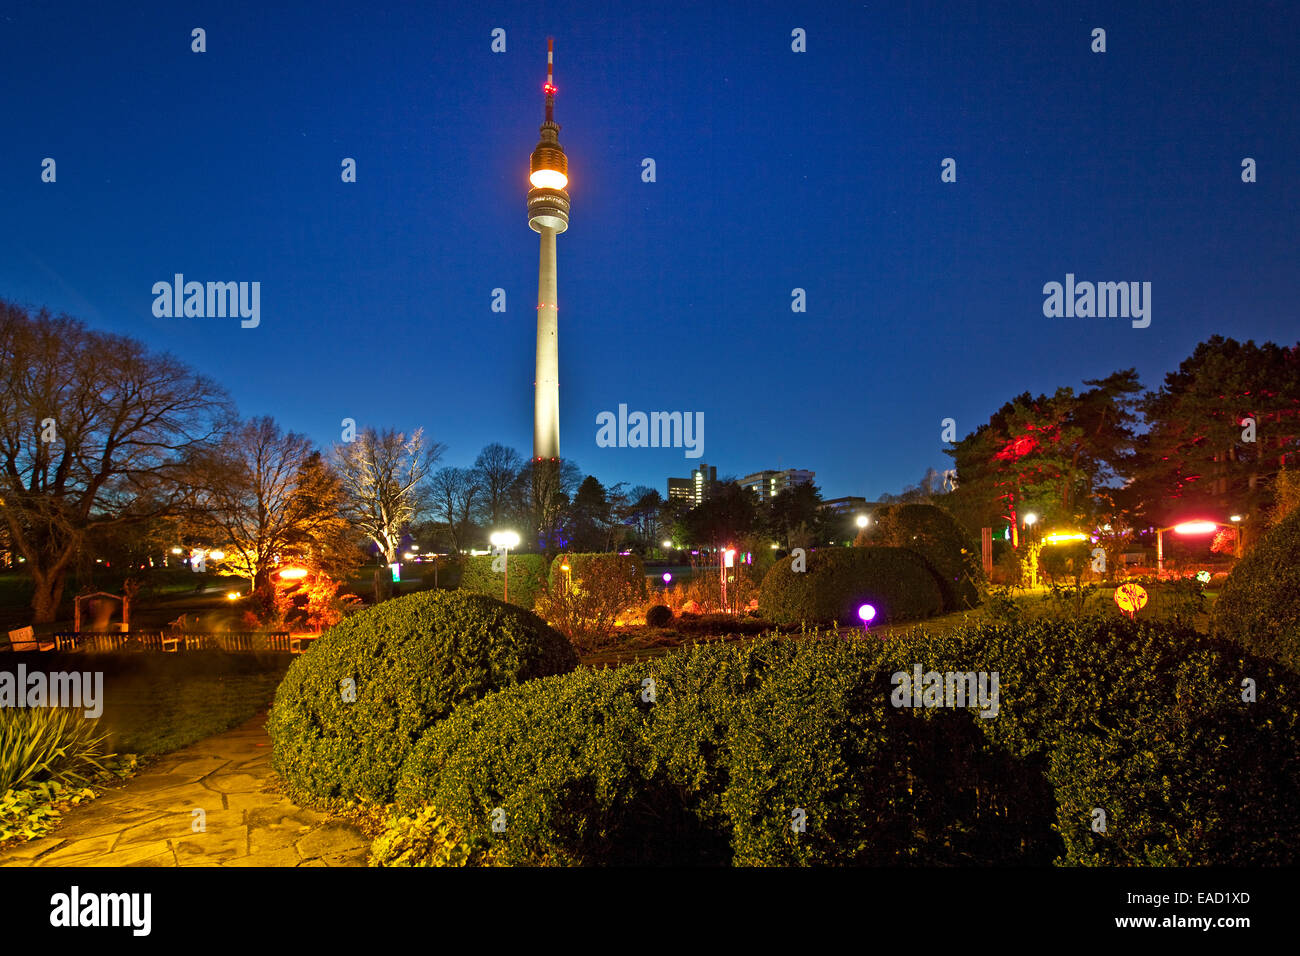 Winter lights in Westphalia Park with the television tower Florian at dusk, Dortmund, North Rhine-Westphalia, Germany Stock Photo